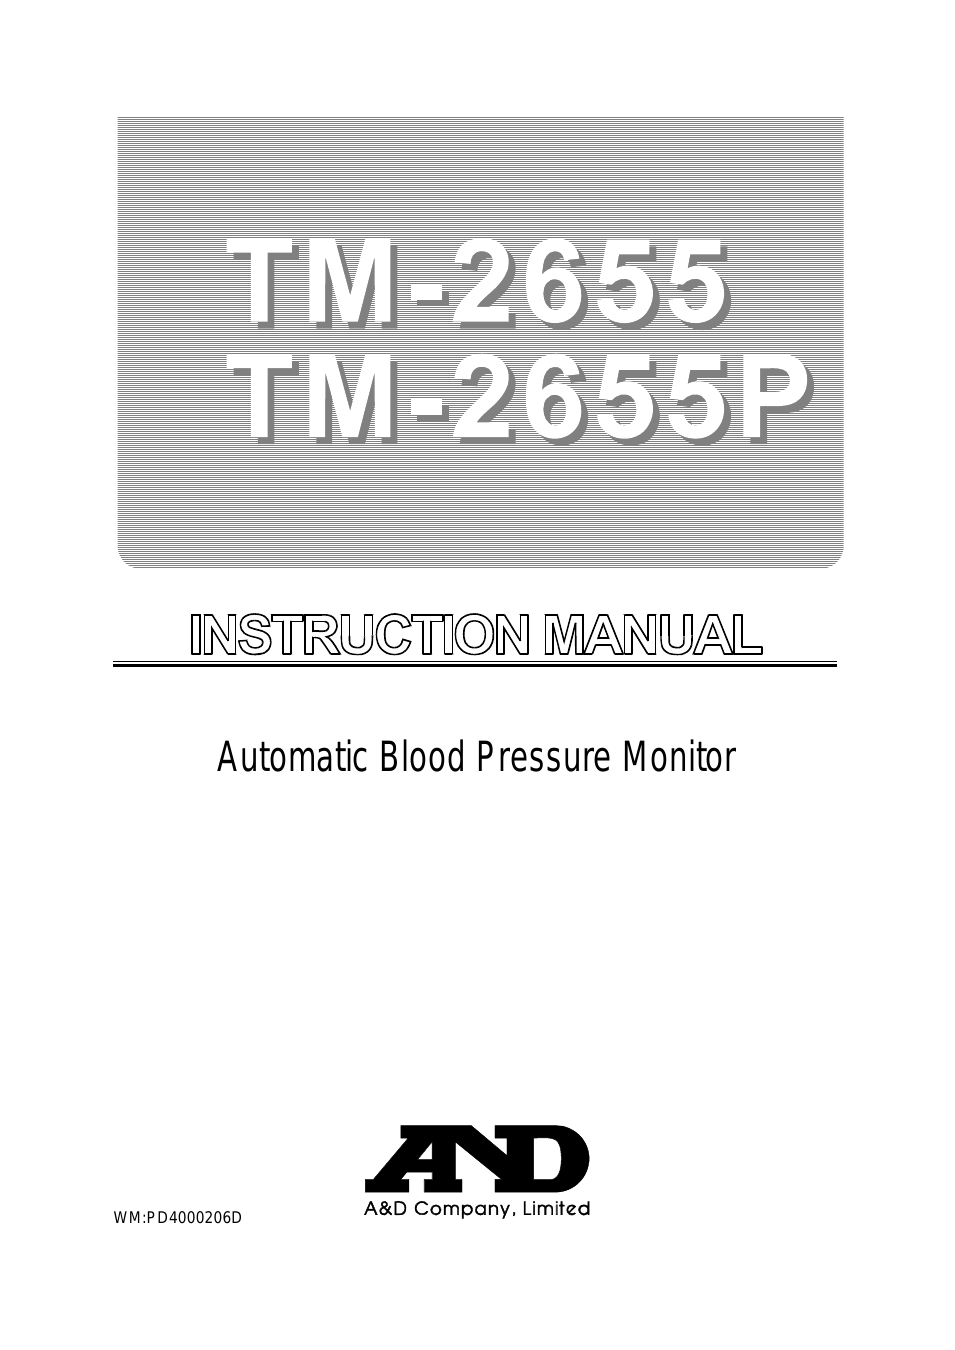 Automatic Blood Pressure Monitor TM-2655 (Page 1)